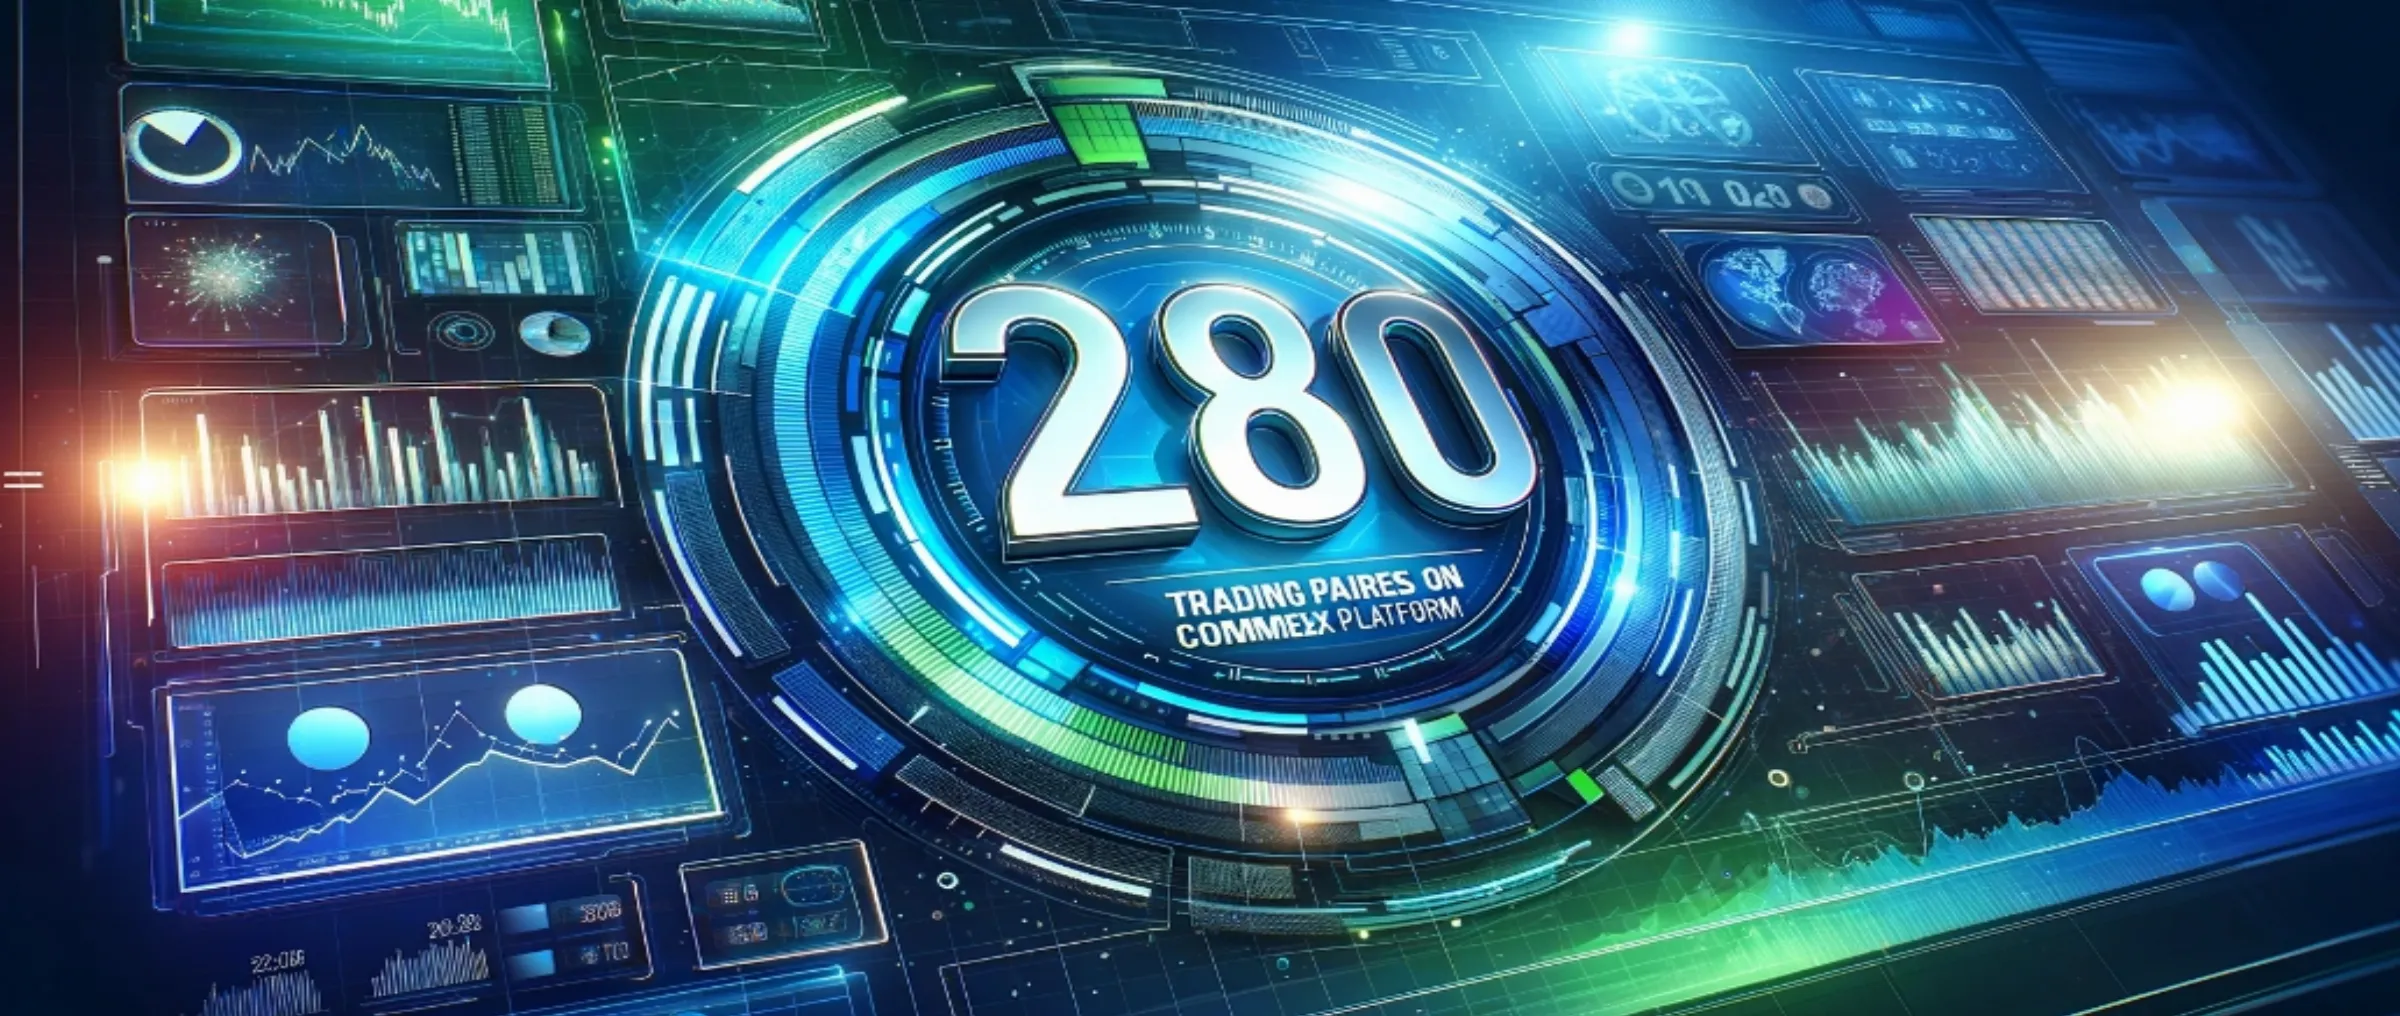 The number of trading pairs on the CommEX platform has increased to 280